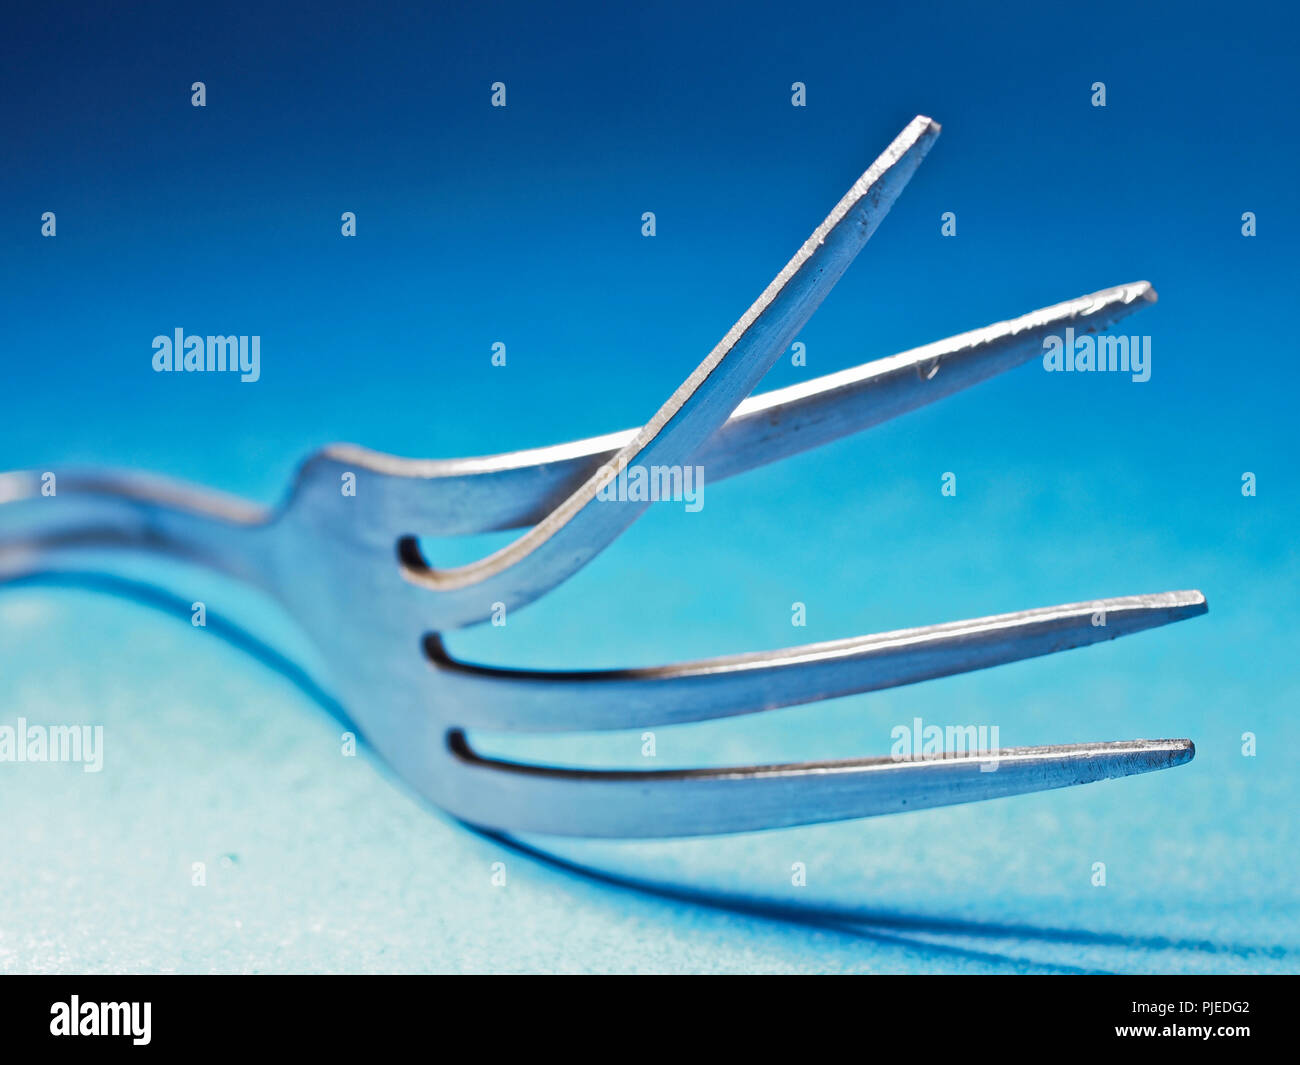 broken fork macro abstract object still life blue background cocnept Stock Photo